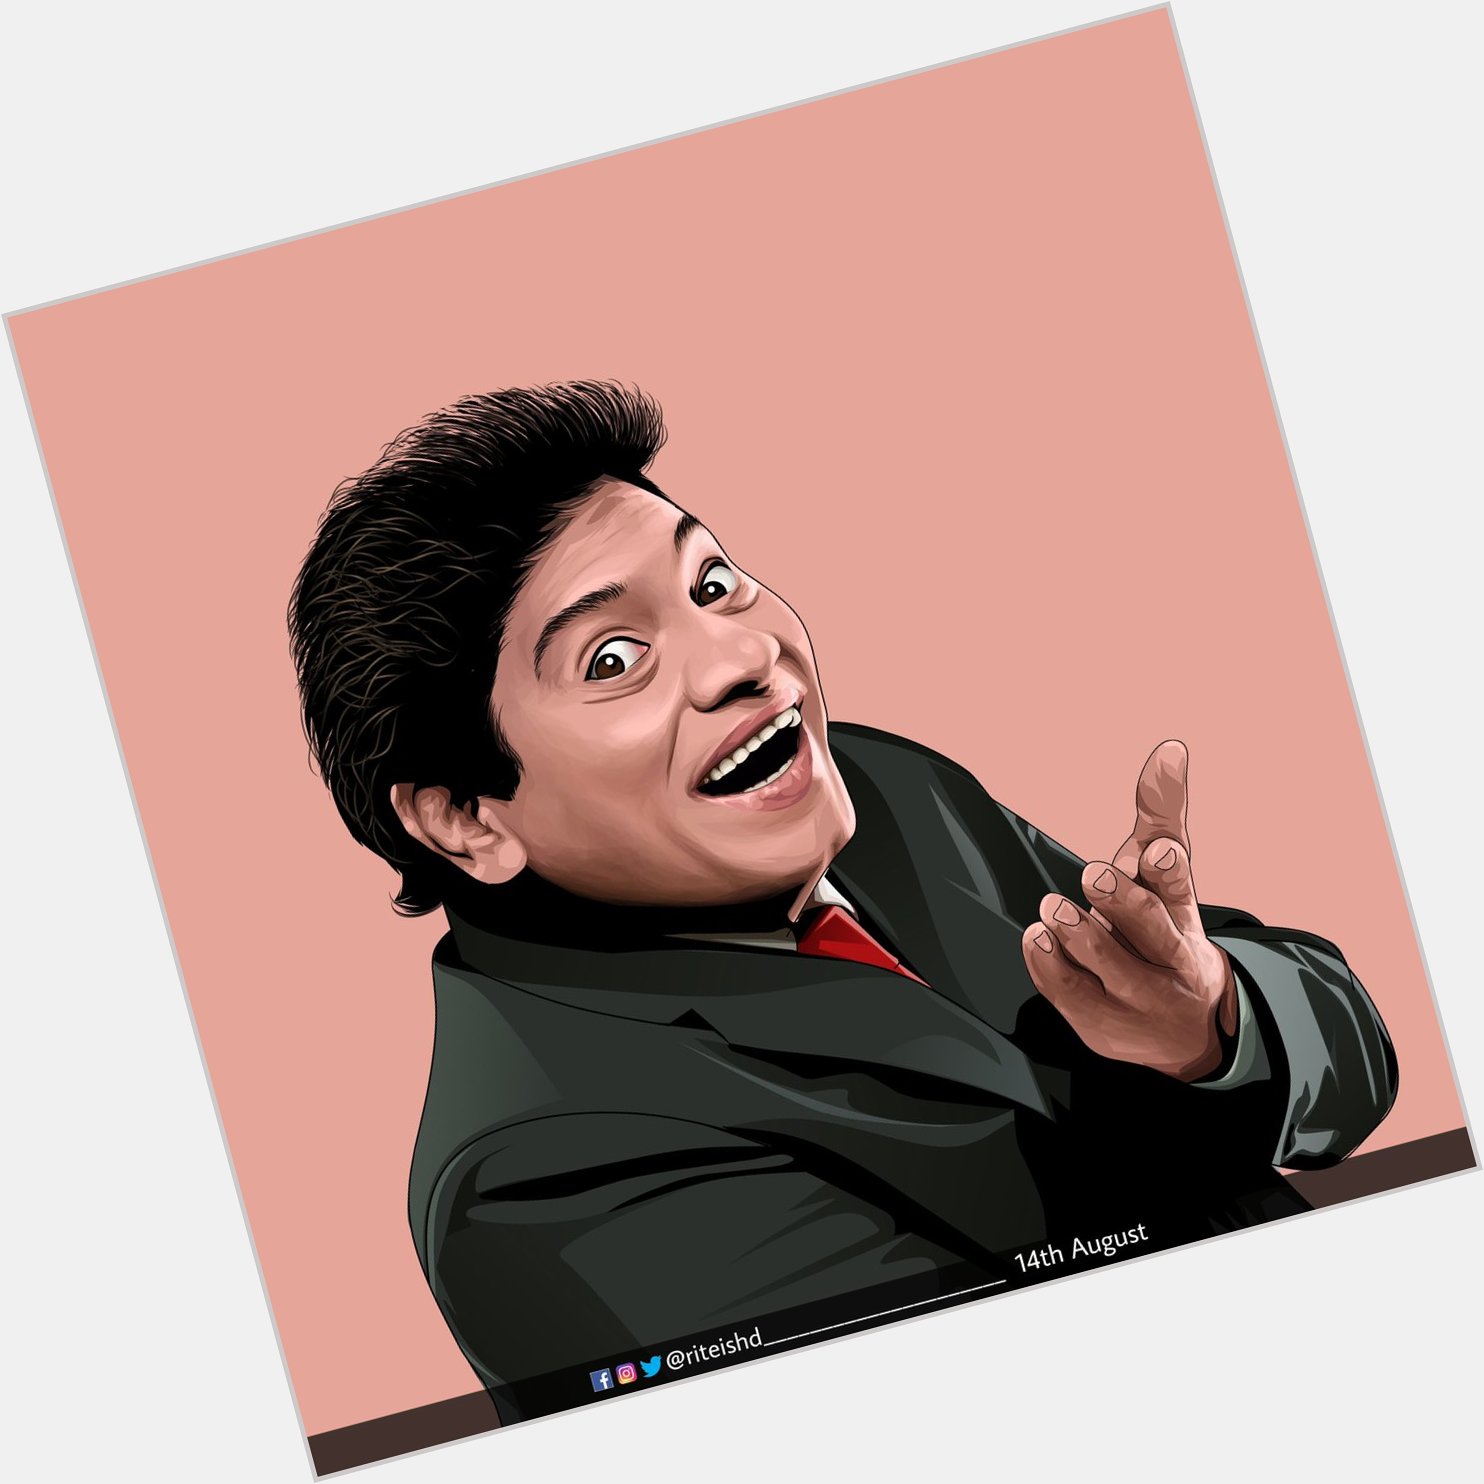 Happy birthday Johnny lever  Allah almighty God bless you and give big life with success king of comedy 